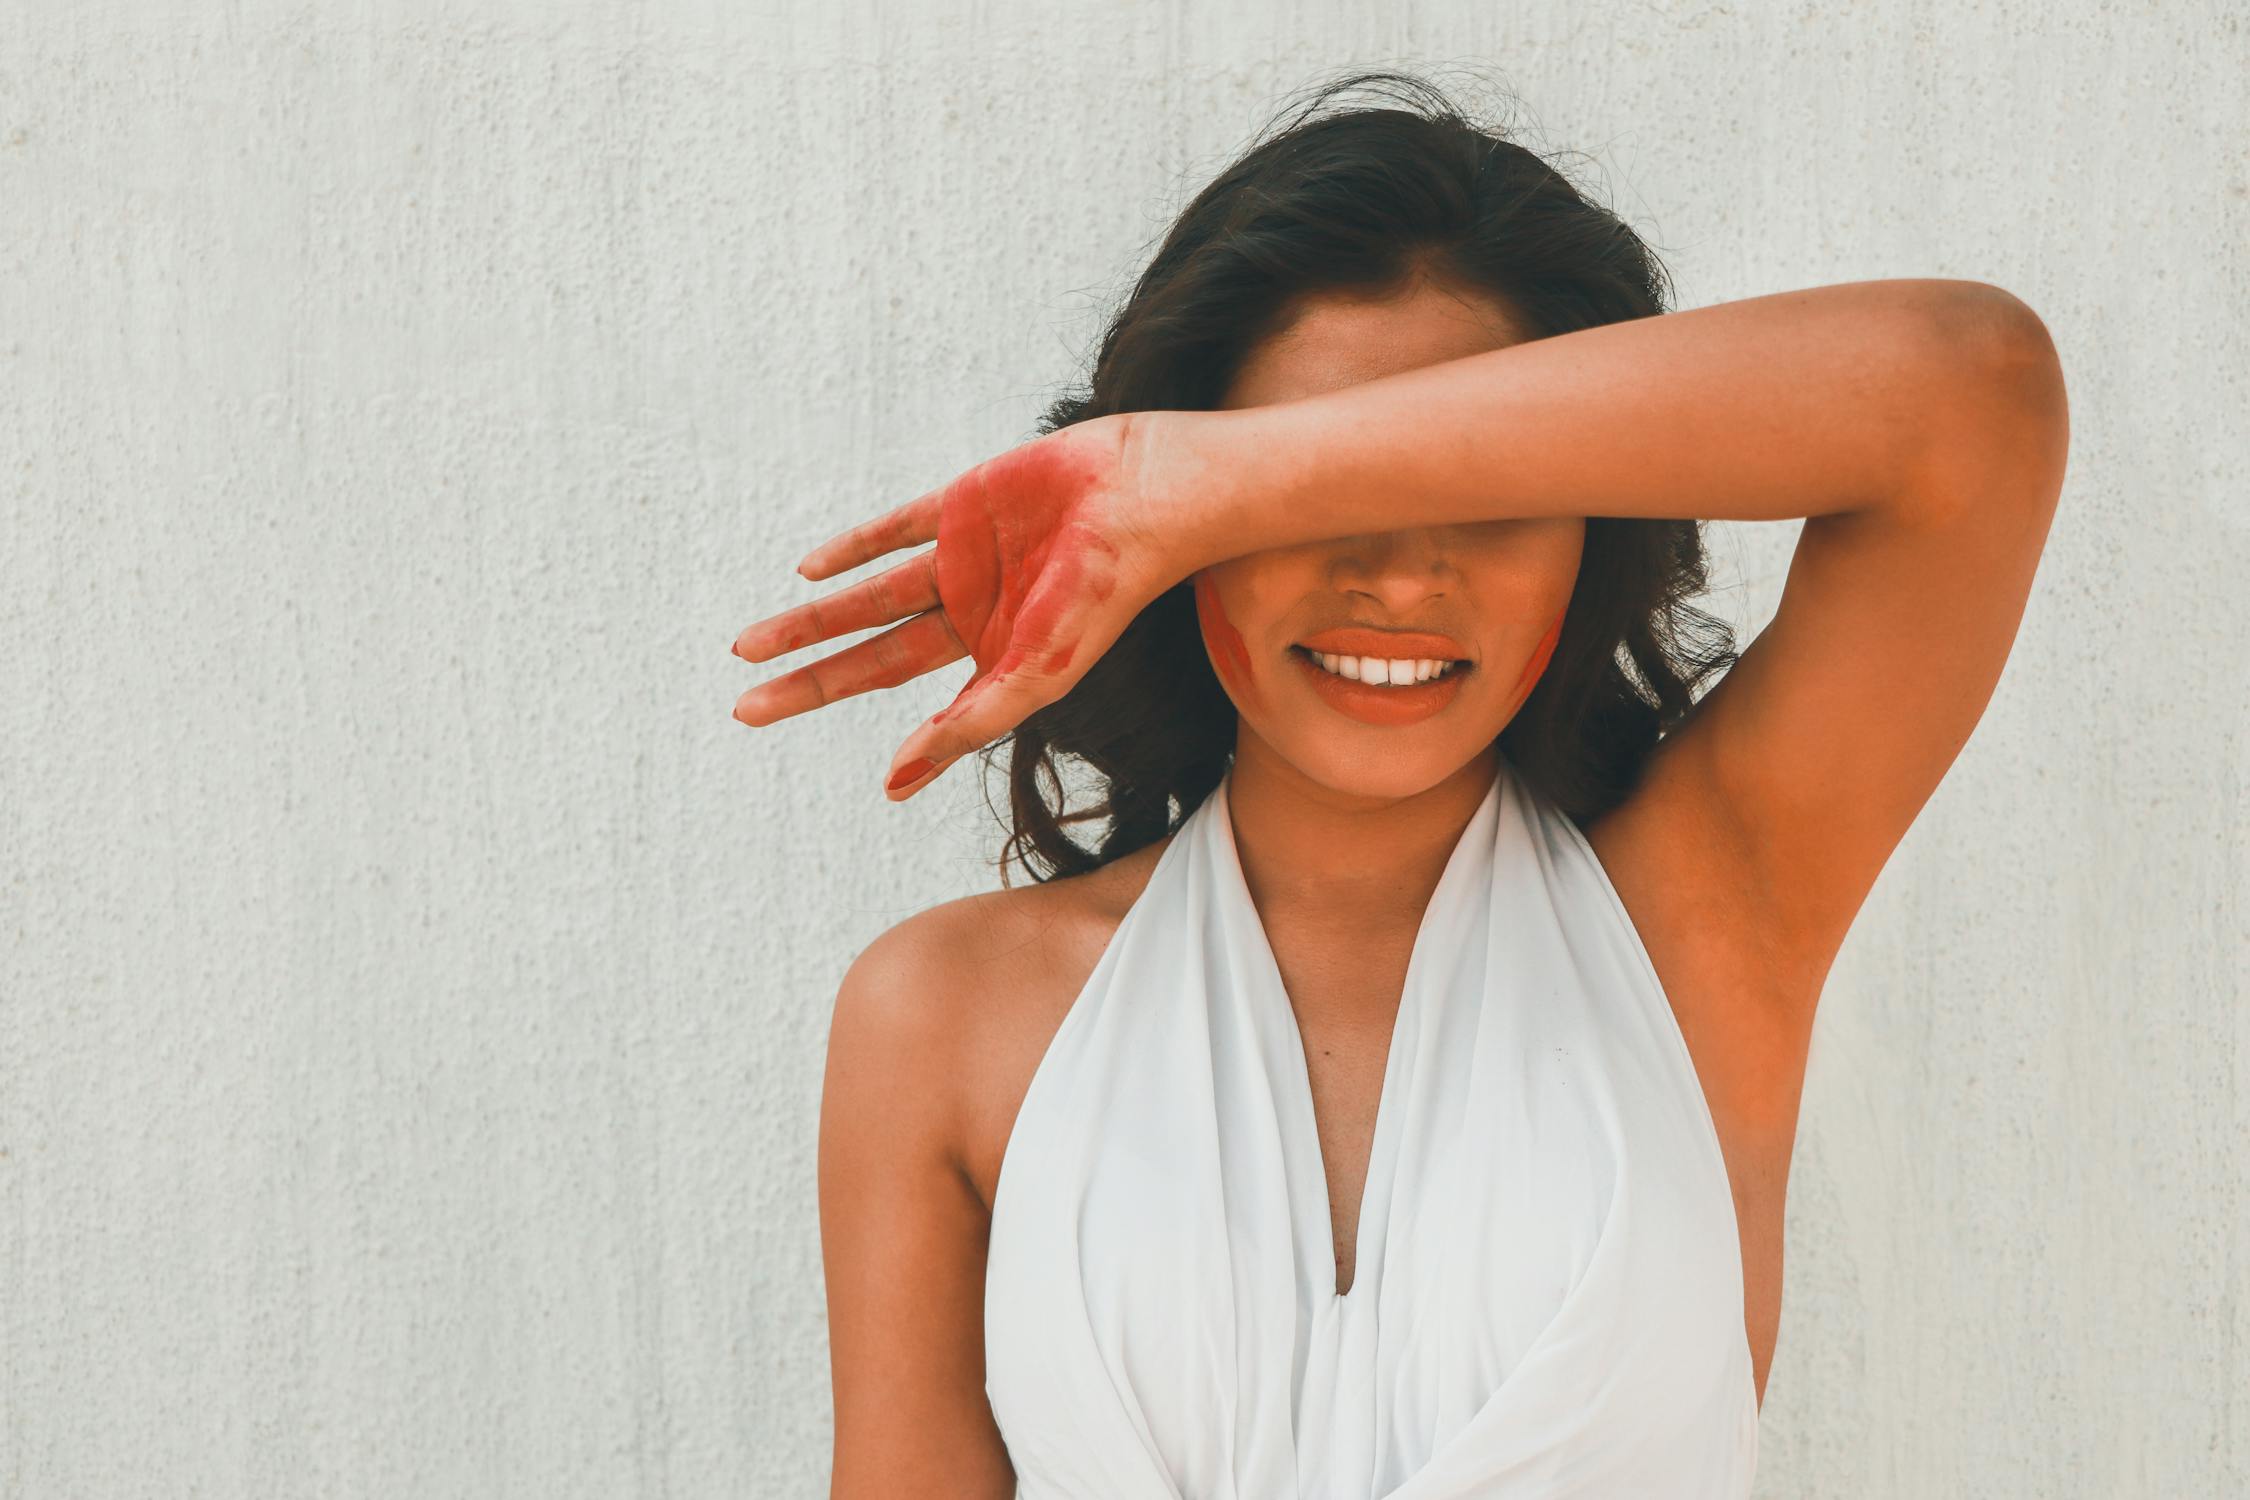 Mindset Photo by Sakshi Patwa from Pexels: https://www.pexels.com/photo/woman-in-white-halter-top-covering-eyes-with-arm-7295414/